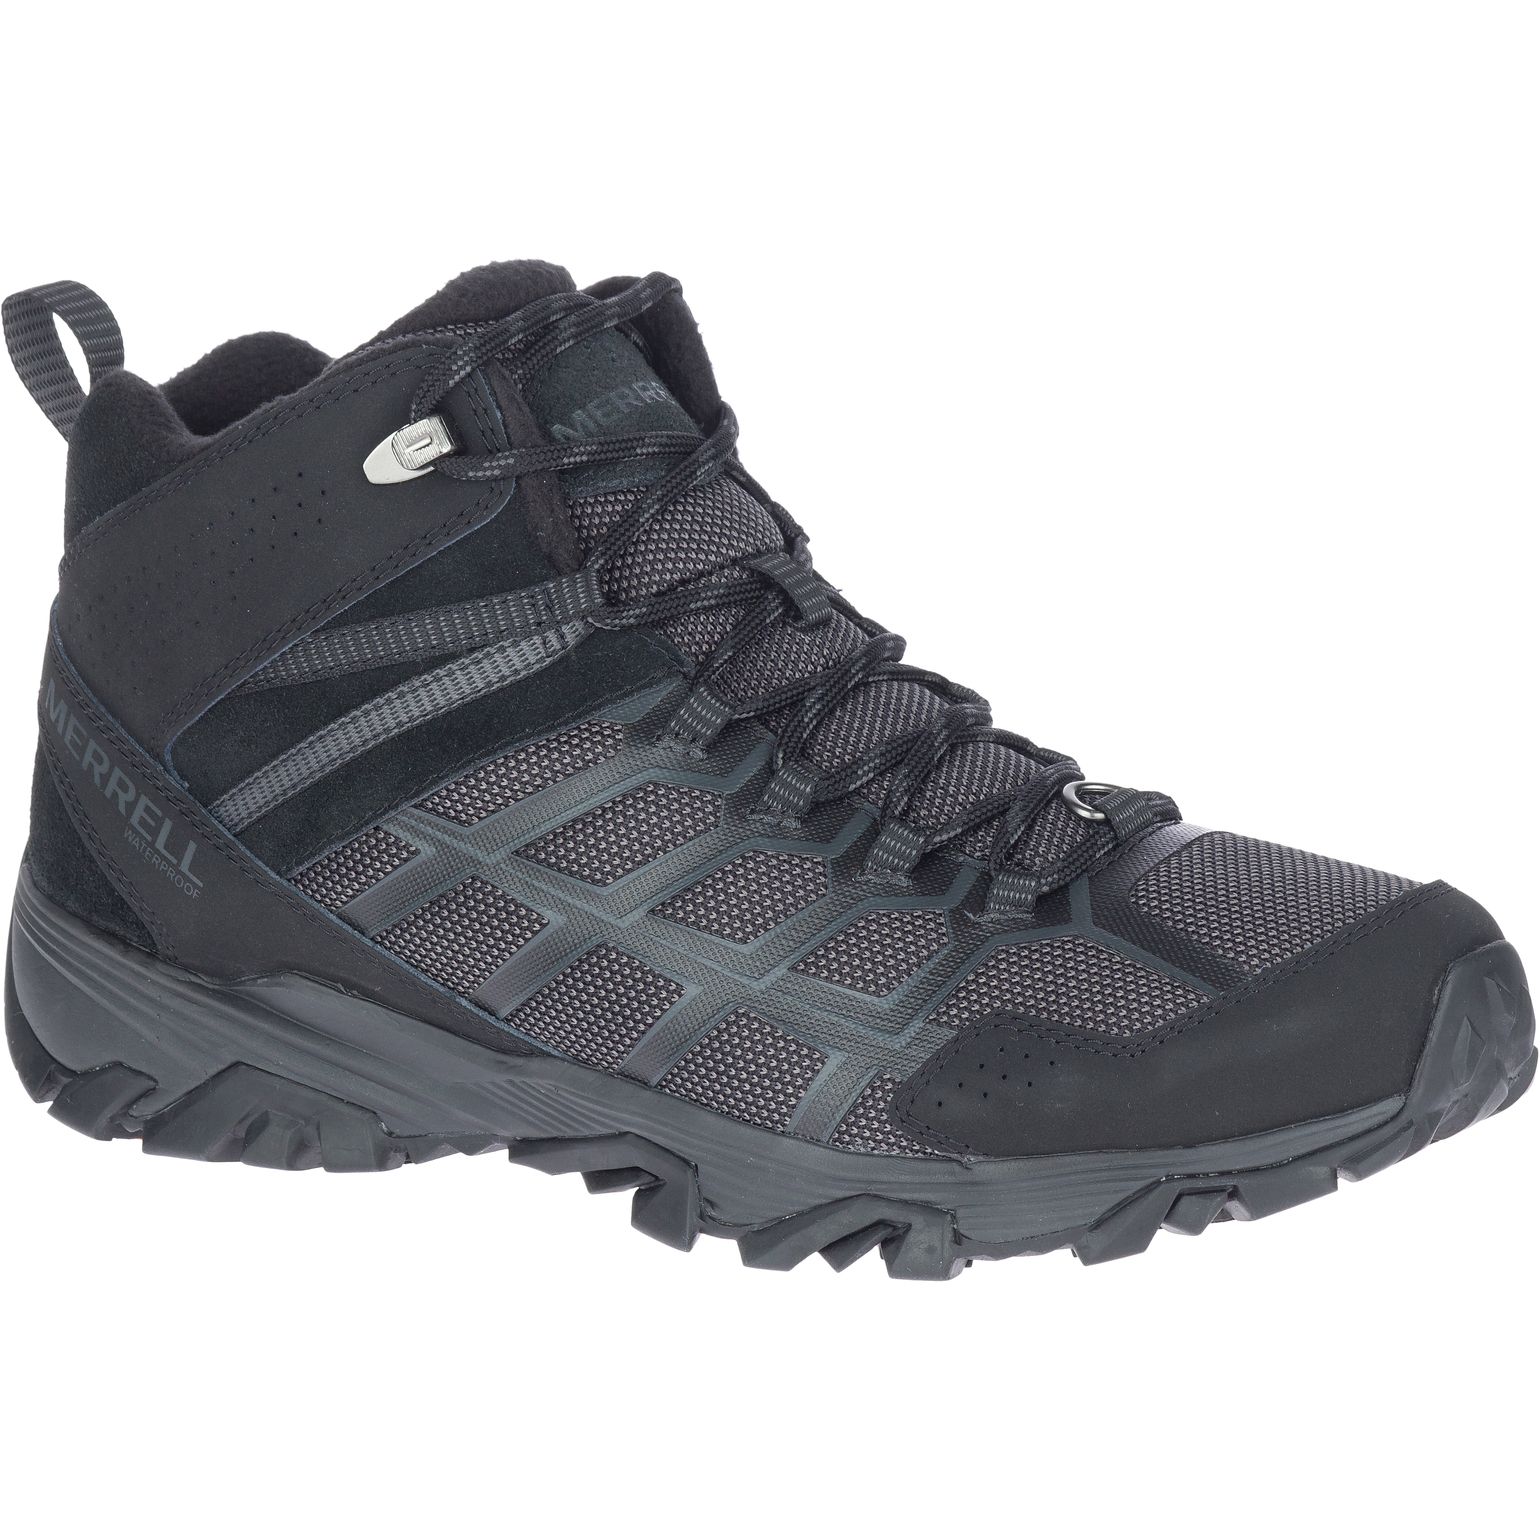 Moab FST 3 Thermo Mid Waterproof BLACK